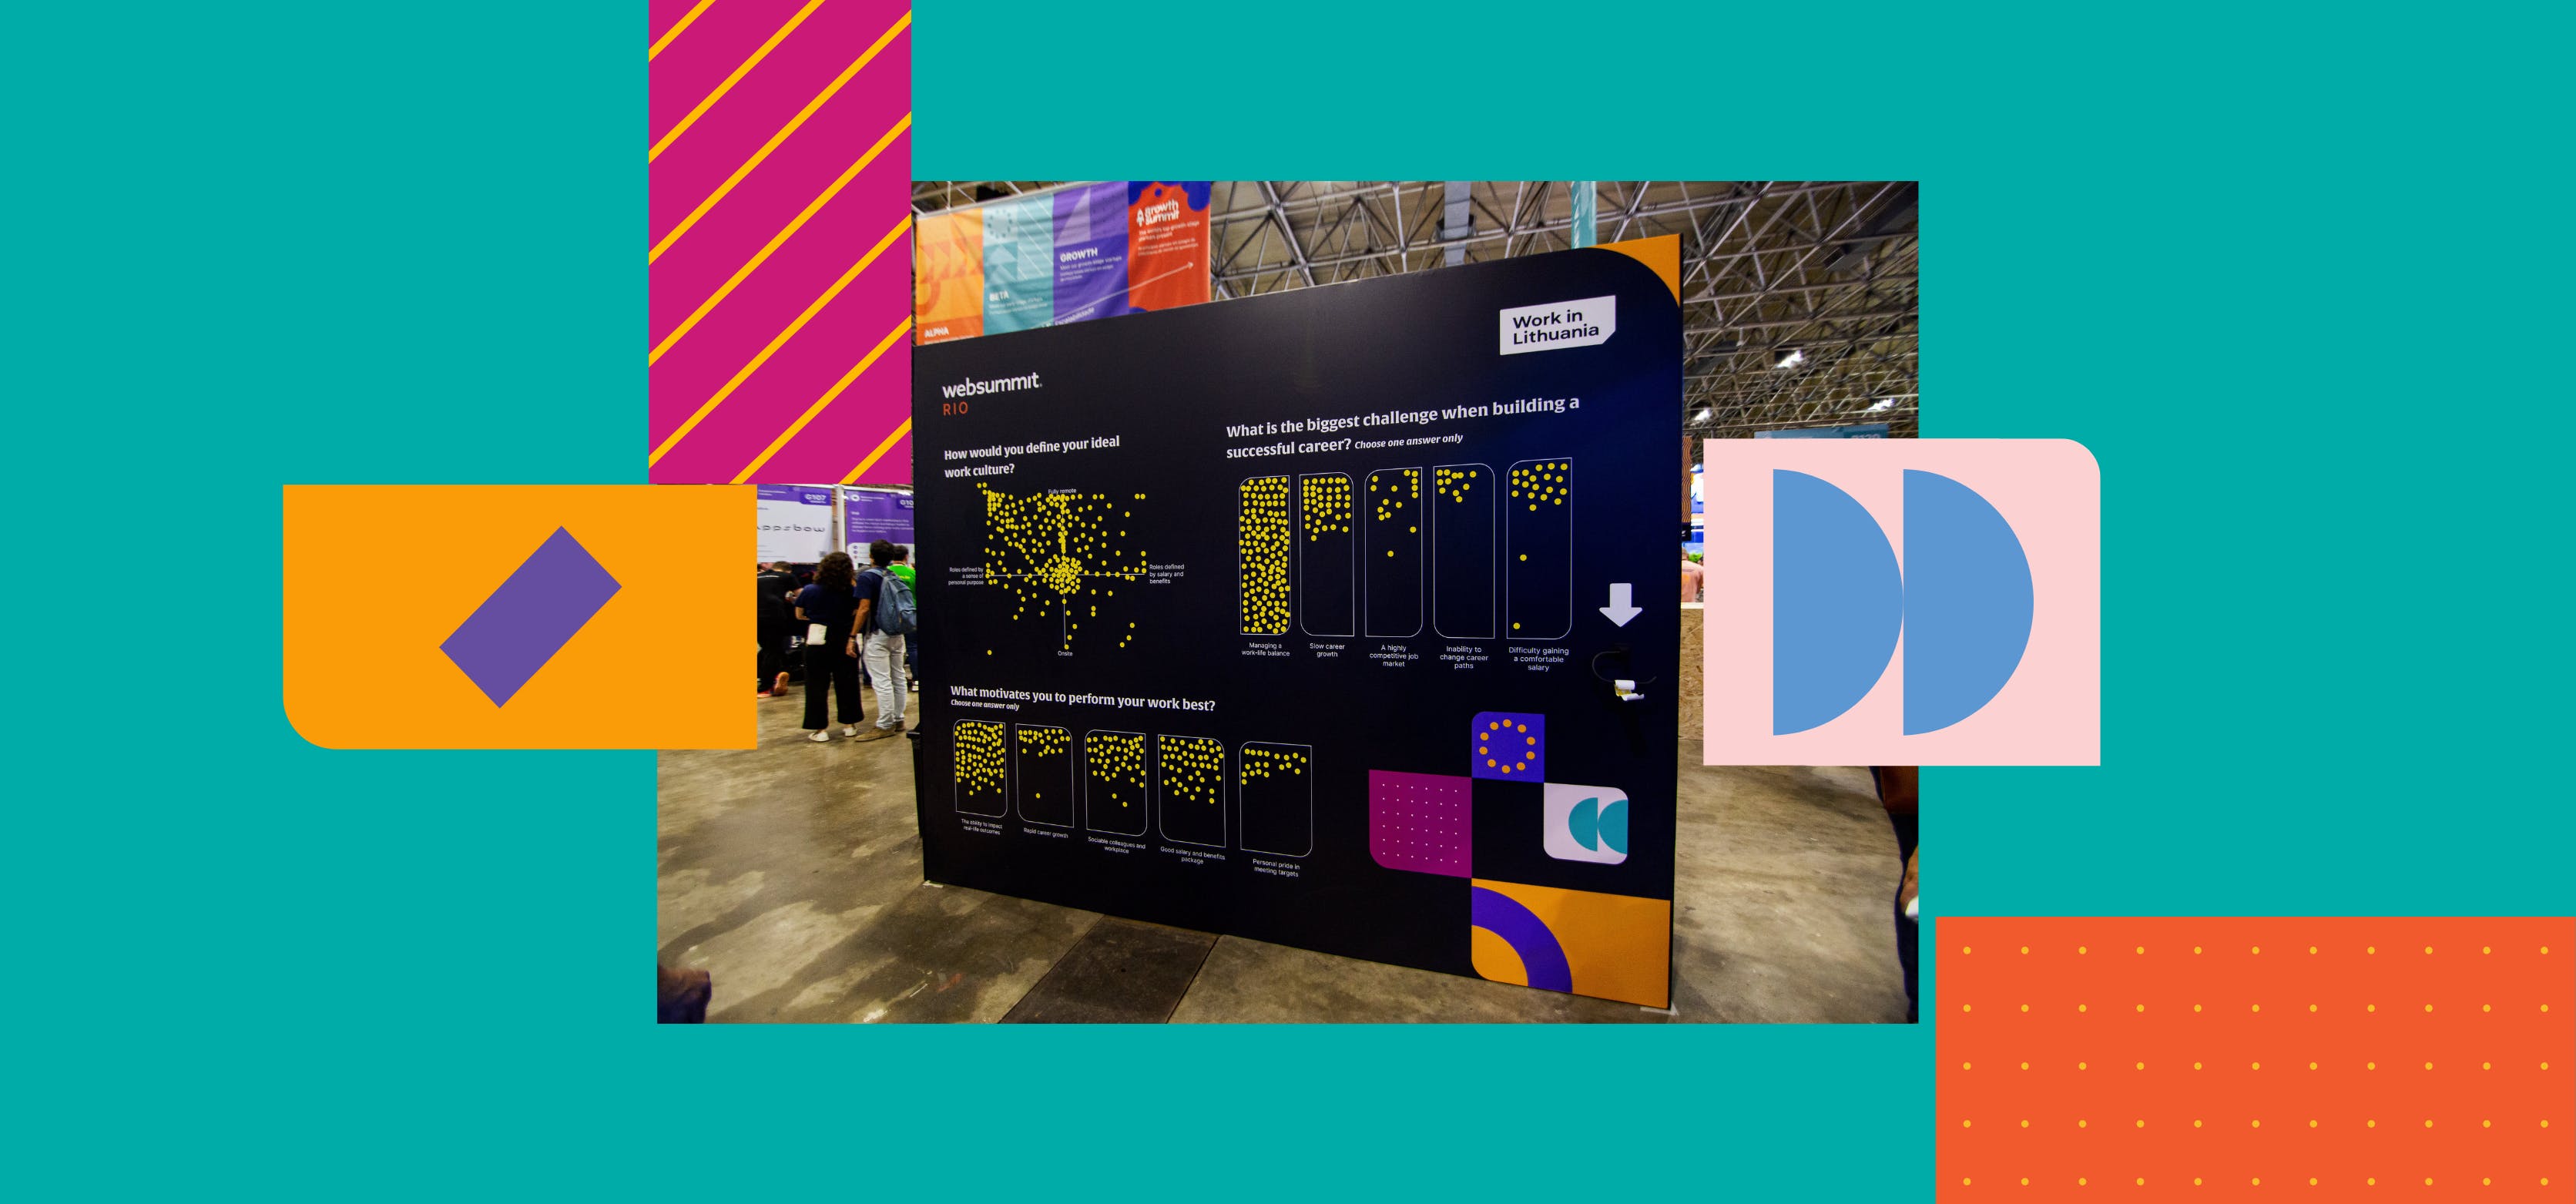 A printed wall stands in the middle of what appears to be an exhibition floor. Steel rafters are visible in the ceiling above the wall, and people are milling around exhibitor stands behind the wall. On the wall itself, the Web Summit Rio and Work in Lithuania logos are in the top left- and right-hand corners, respectively. Three questions are visible on the board, with small circular stickers indicating responses to them. The questions read 'How would you define your ideal work culture?', 'What is the biggest challenge when building a successful career?' and 'What motivates you to perform your work best?'